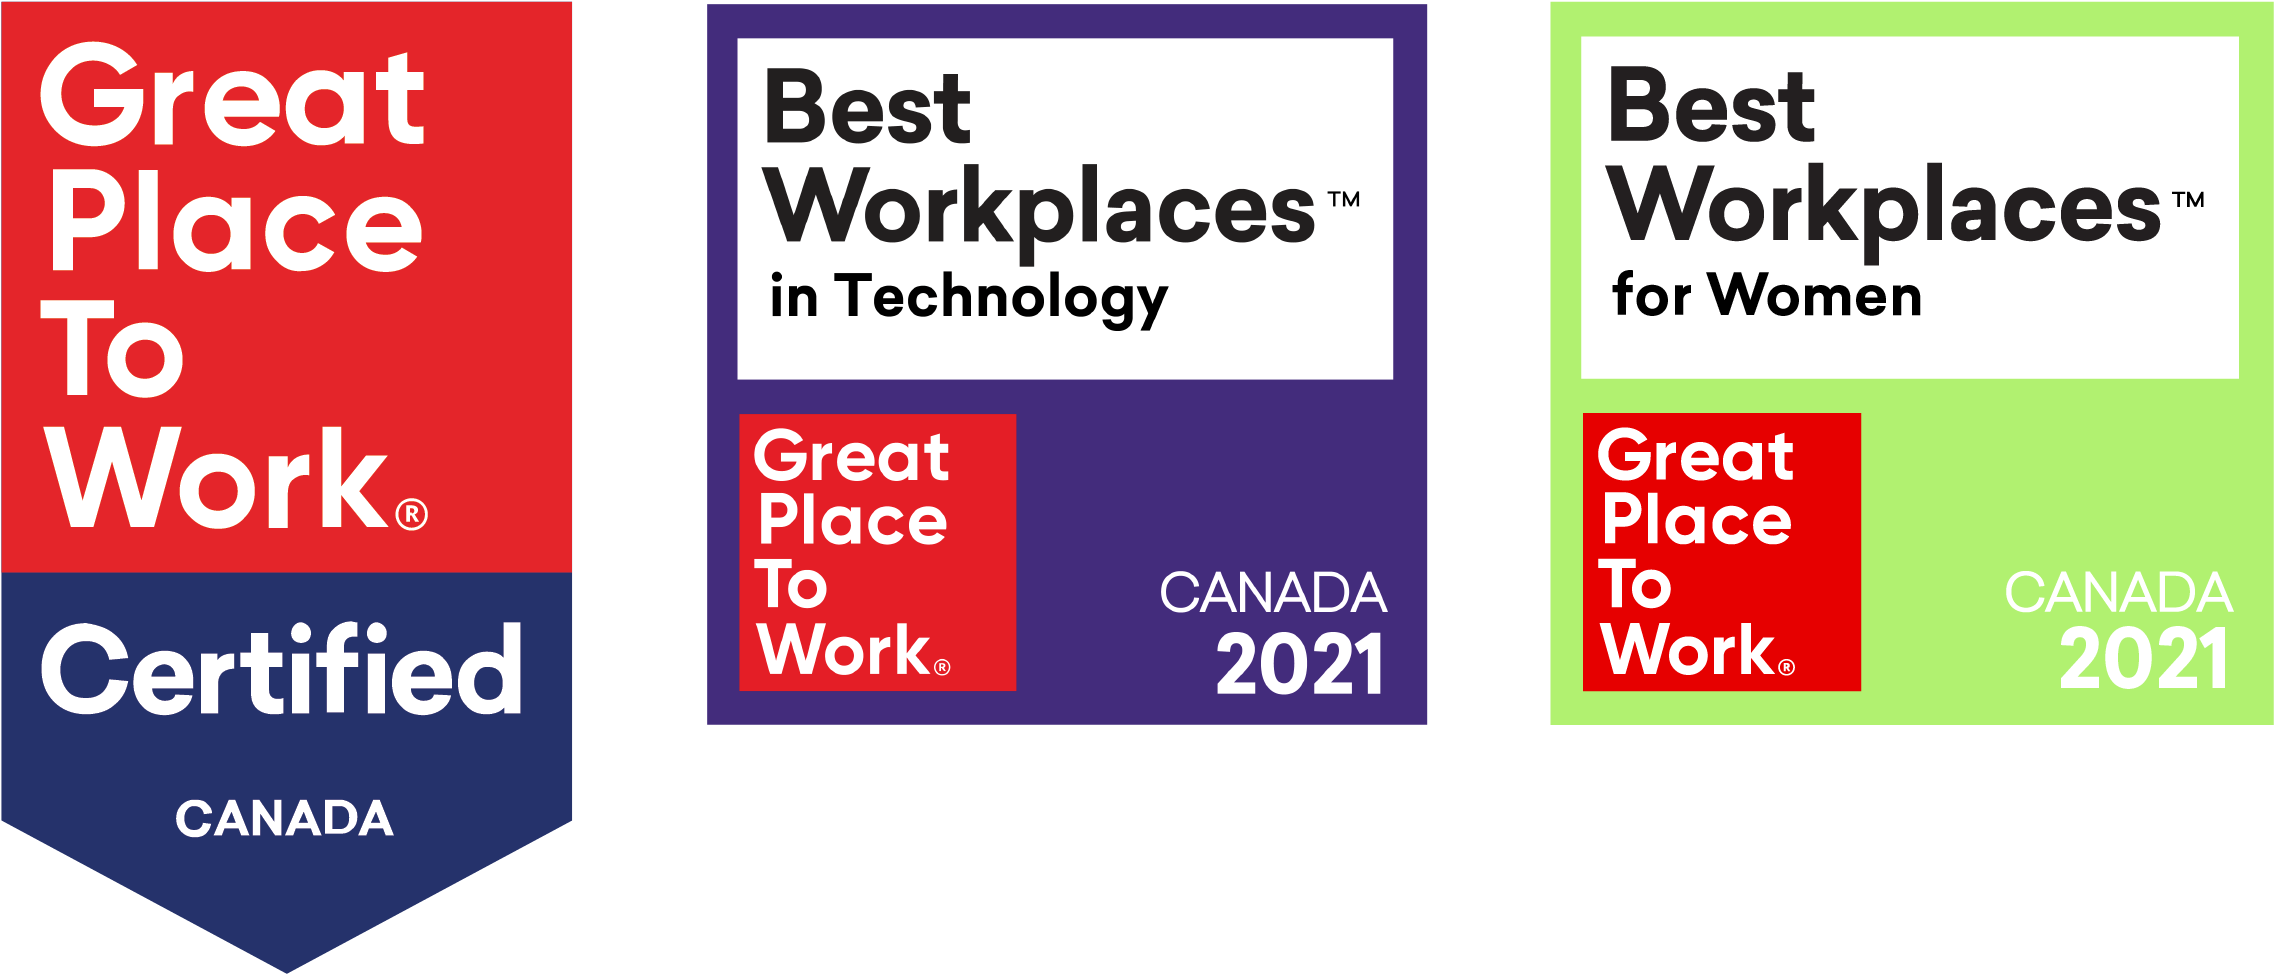 How to get on the list of Best Workplaces in Canada | Great Place To